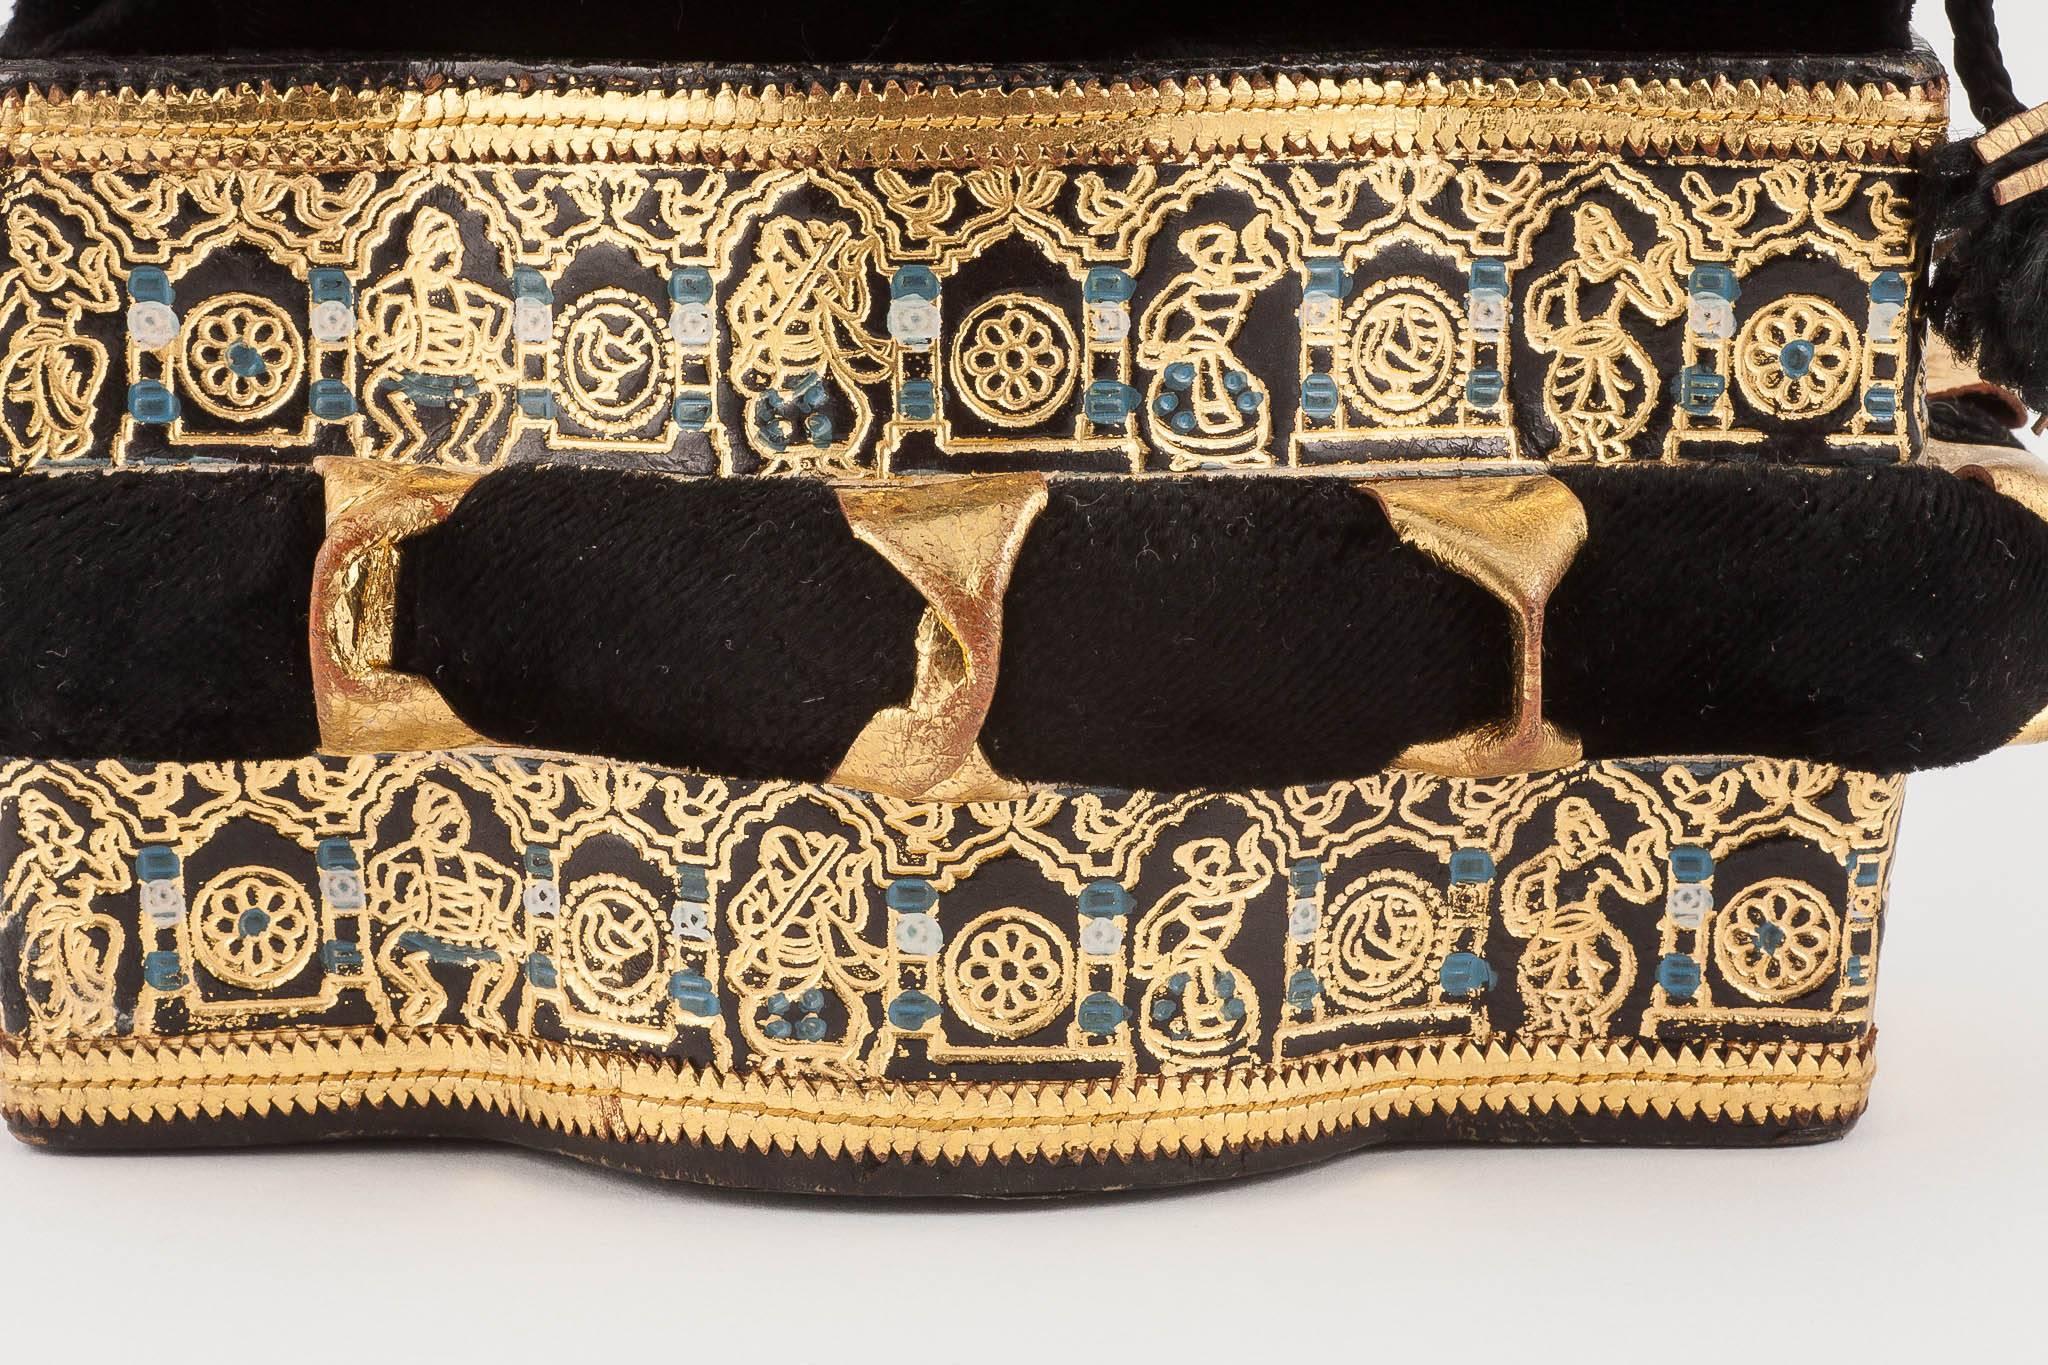 This delightful little evening bag, made of a rigid base of coloured, gilded and stamped leather, with a black velvet drawstring top, channels the eastern exoticism that runs through Hollywood in the early 1940s (films like The Rains Came in 1939